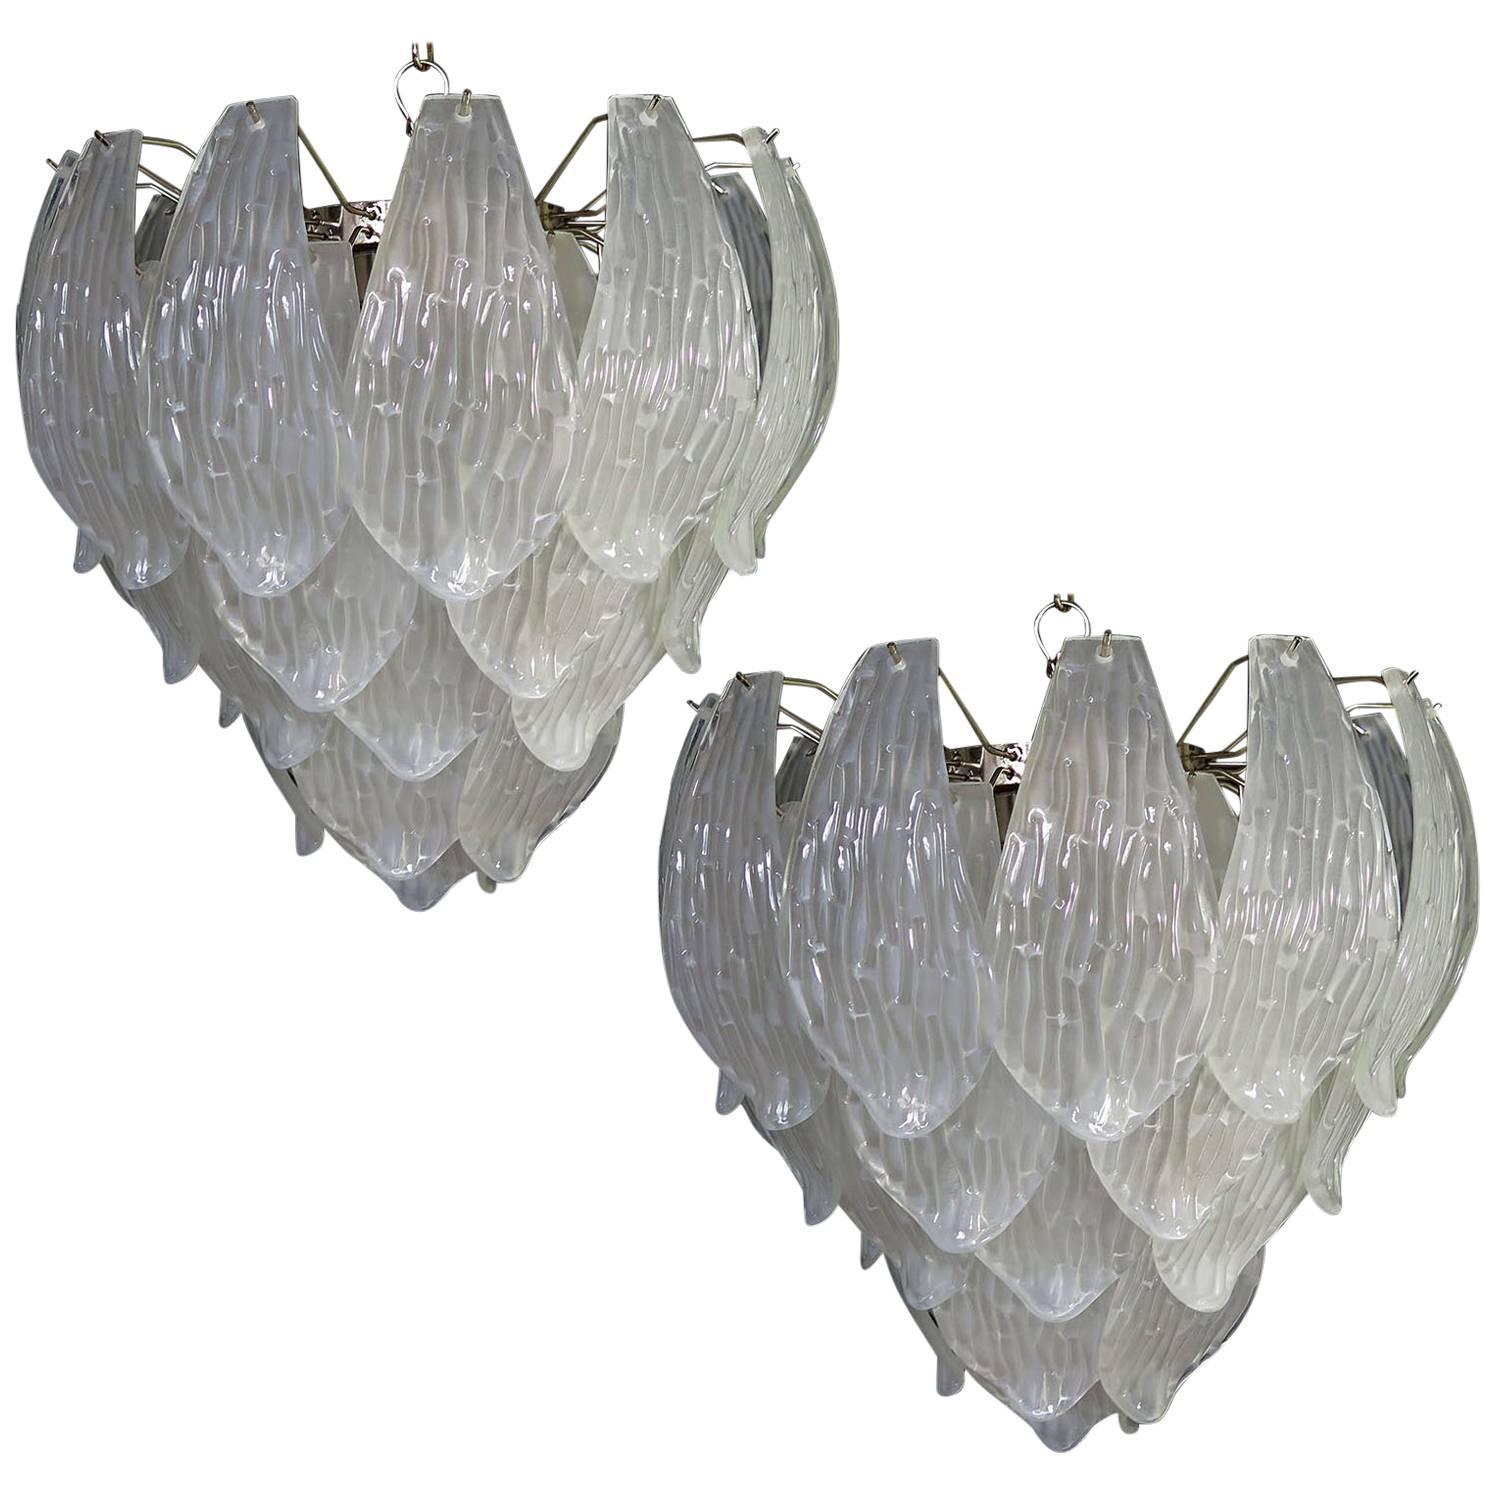 Pair of huge Italian vintage Murano chandelier made by 41 handblown transparent frosted carved glass leaves in a
chrome frame.

Dimensions: 49.20 inches (125 cm) height with chain; 25.80 inches (68 cm) height without chain; 21.25 inches (54 
